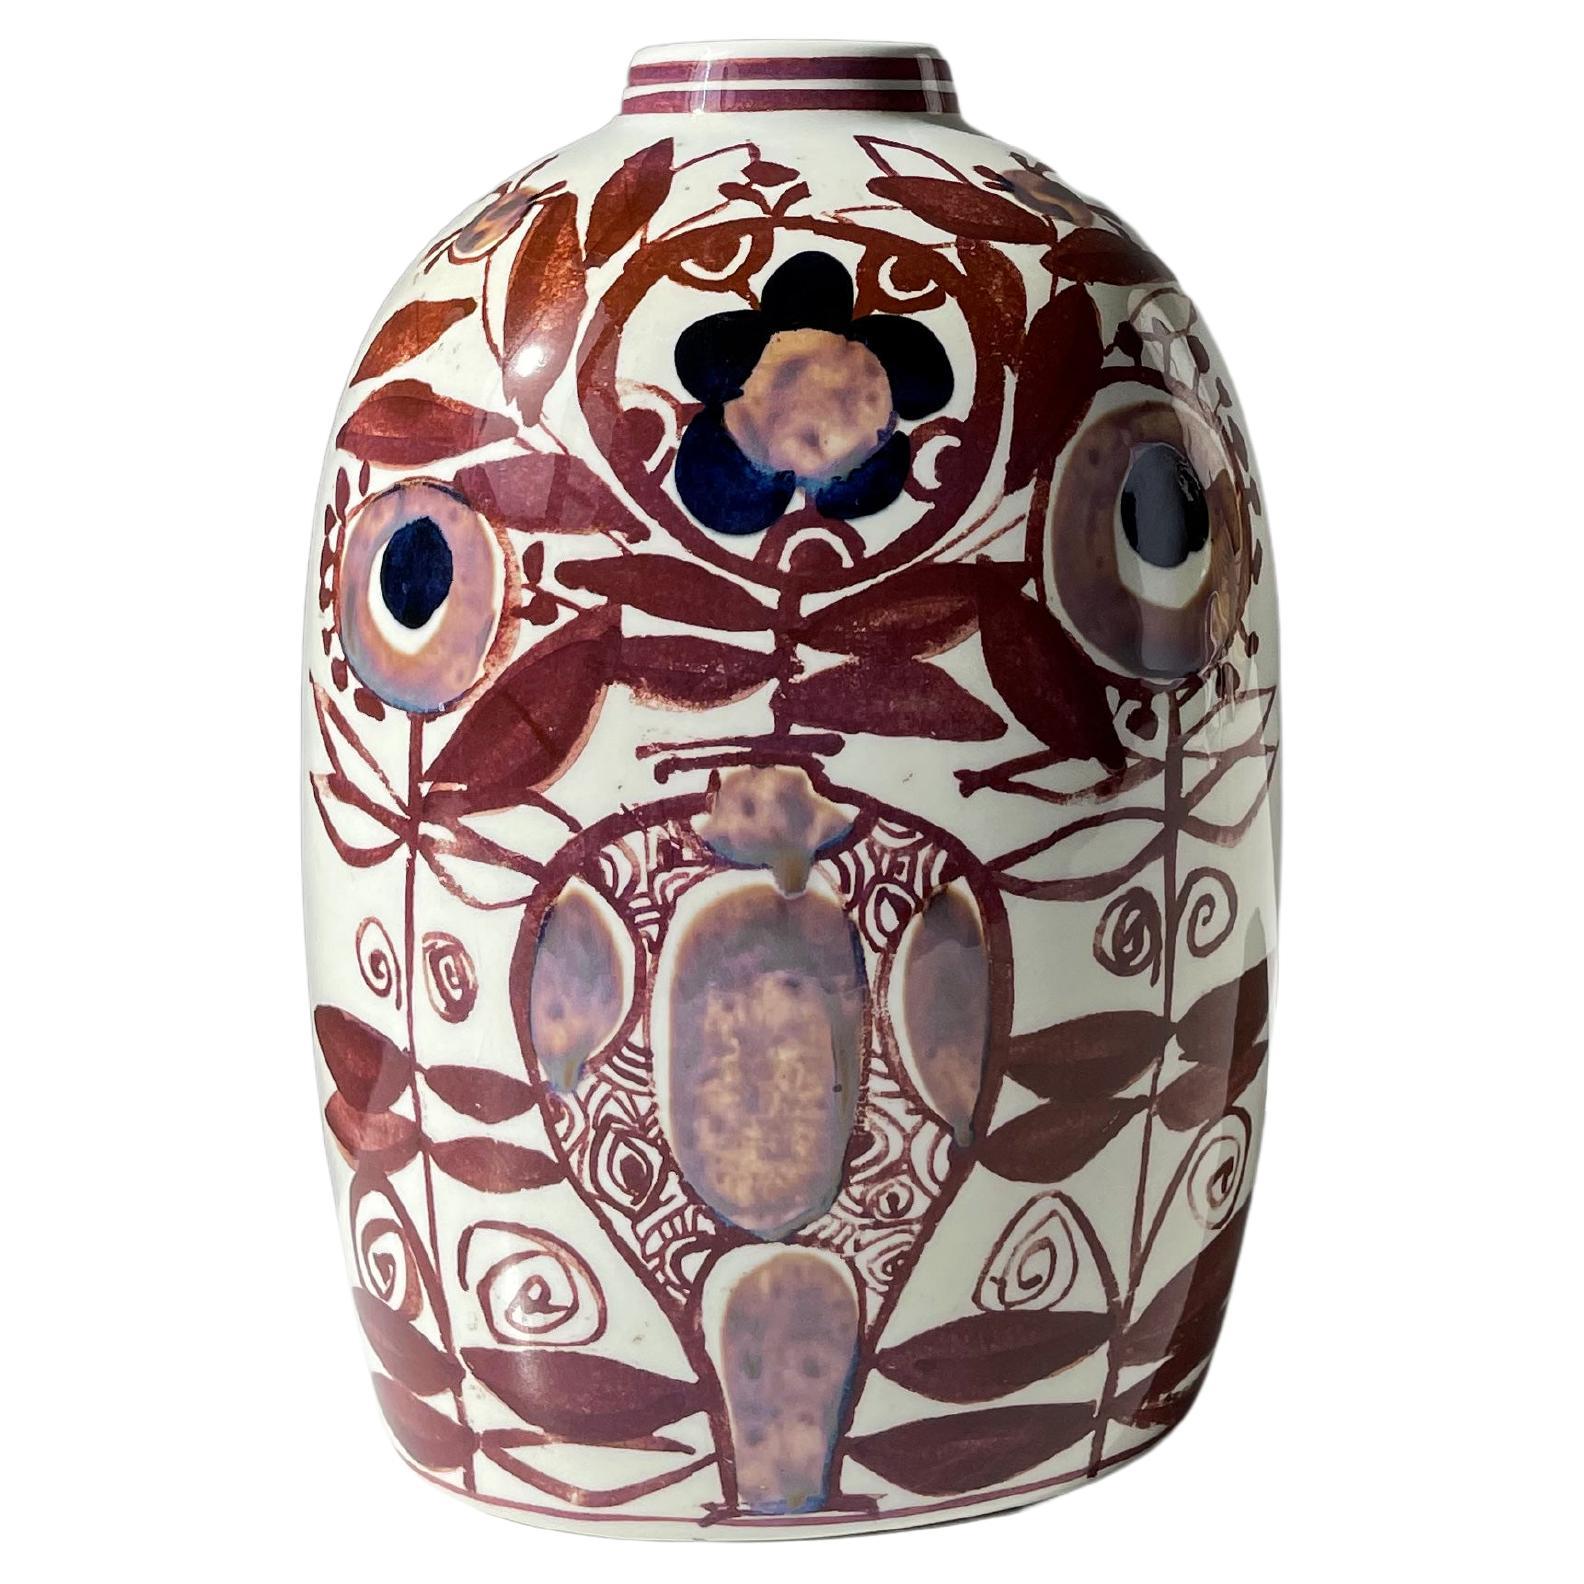 Soft oval shaped midcentury modern faience vase with hand-painted organic floral decor in warm cinnamon brown, light umber and dark blue colors on clean white base. The intricate decorations designed by Kari Christensen for the Royal Copenhagen